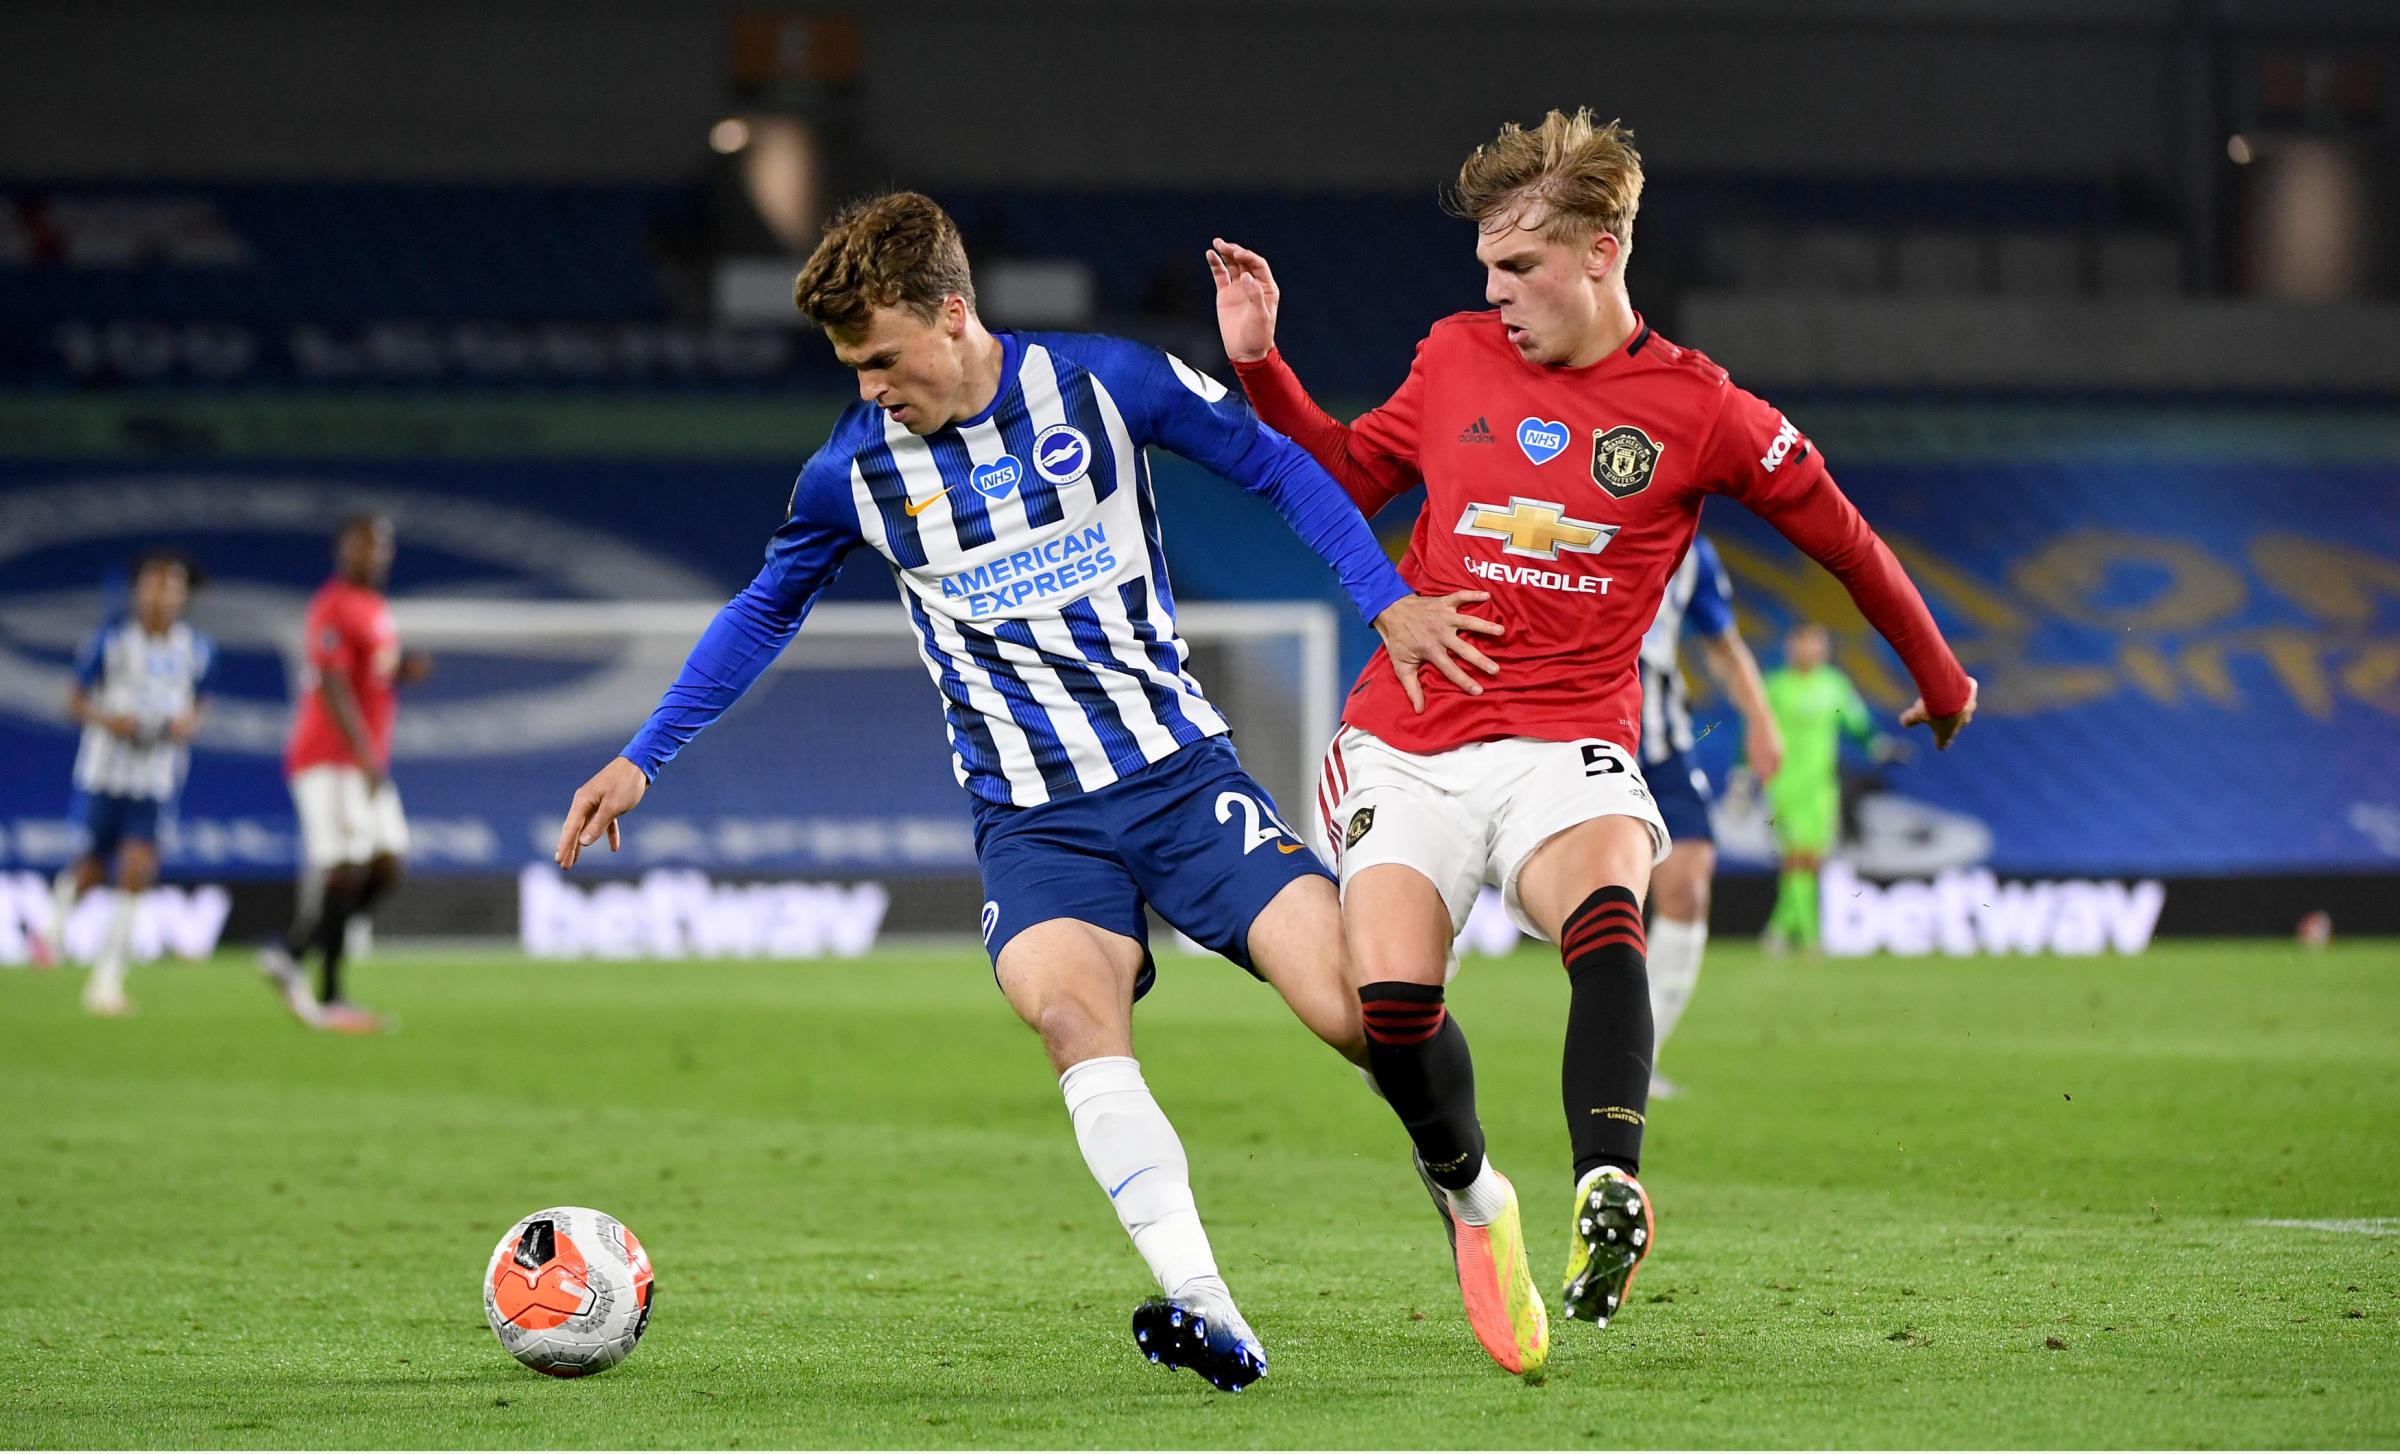 No offers for Albion players as Solly March is linked